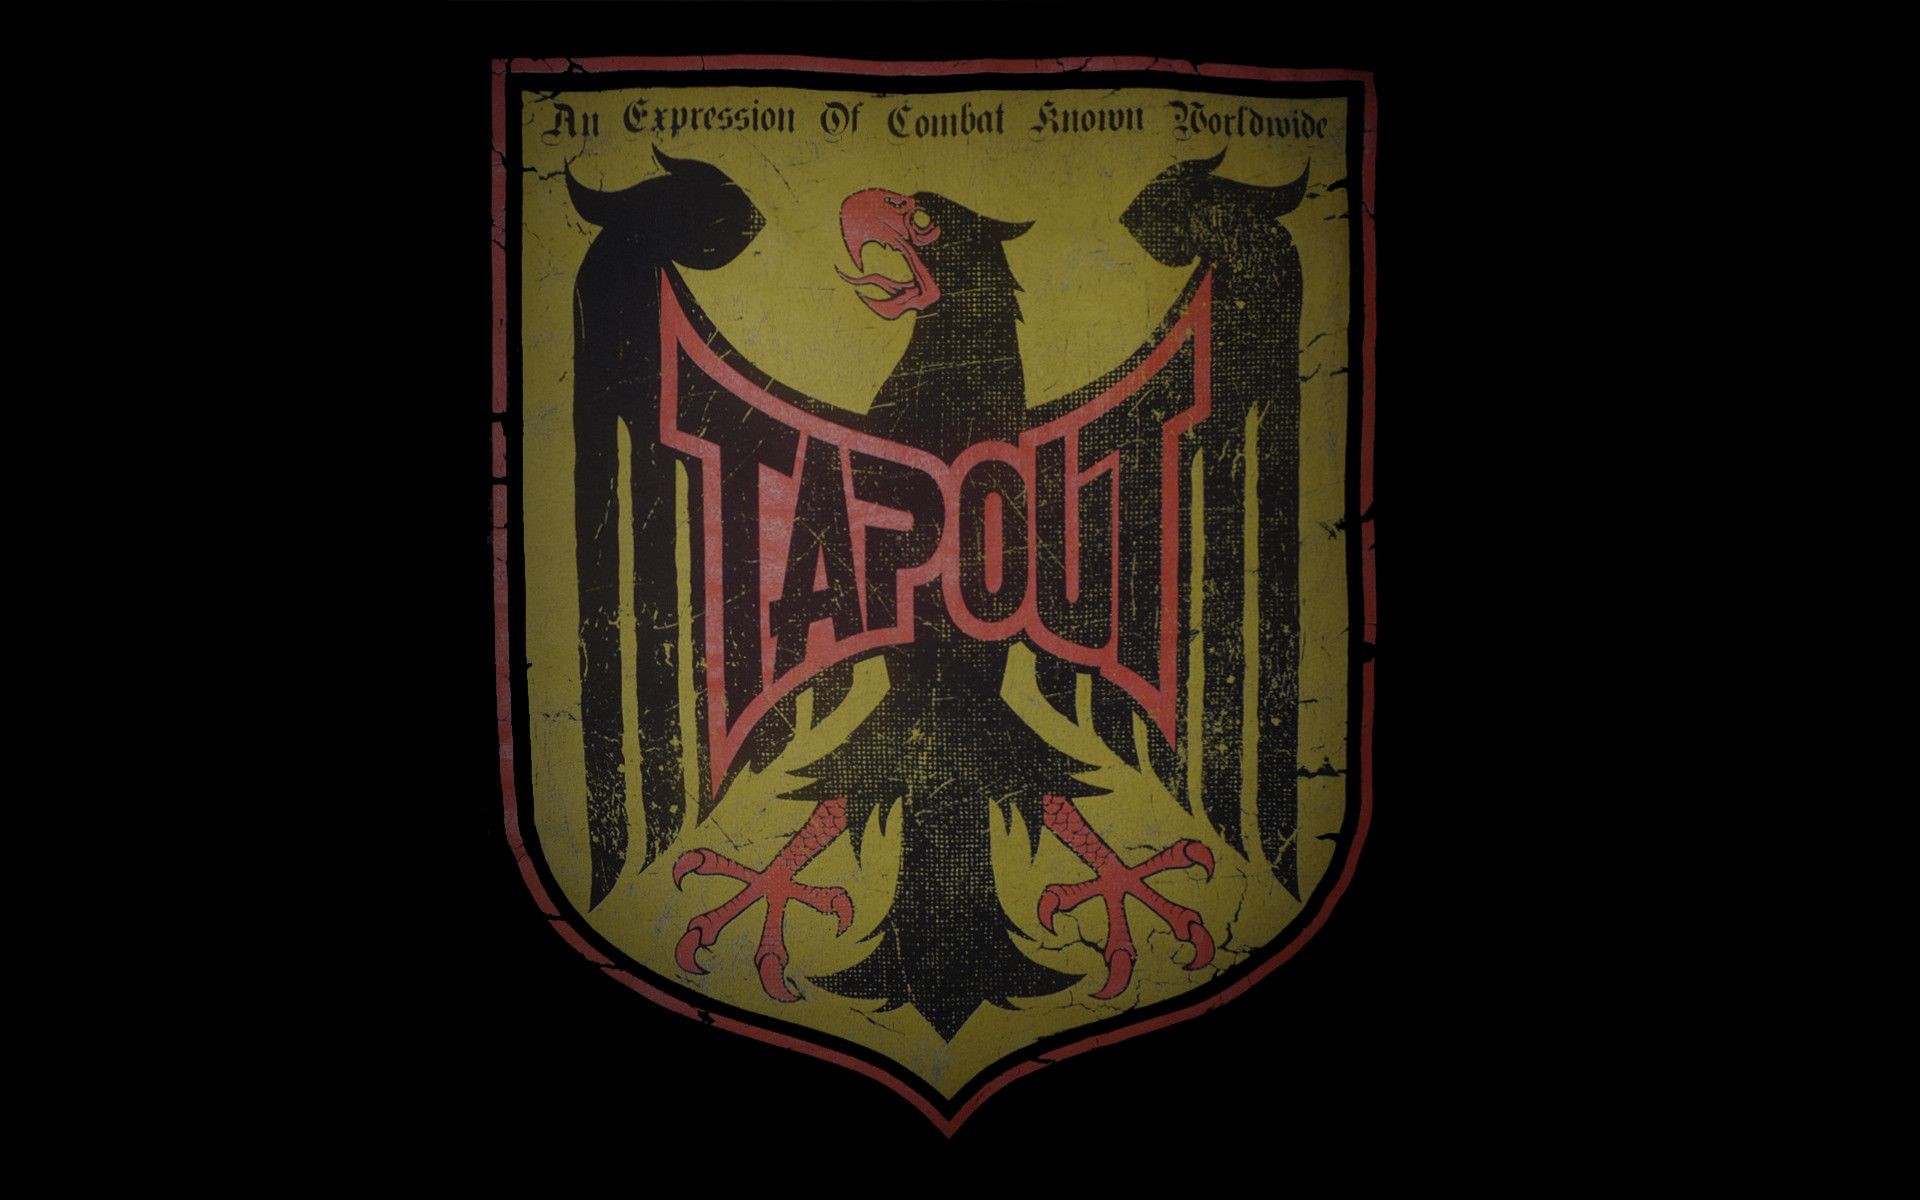 1920x1200 Tapout Wallpapers 